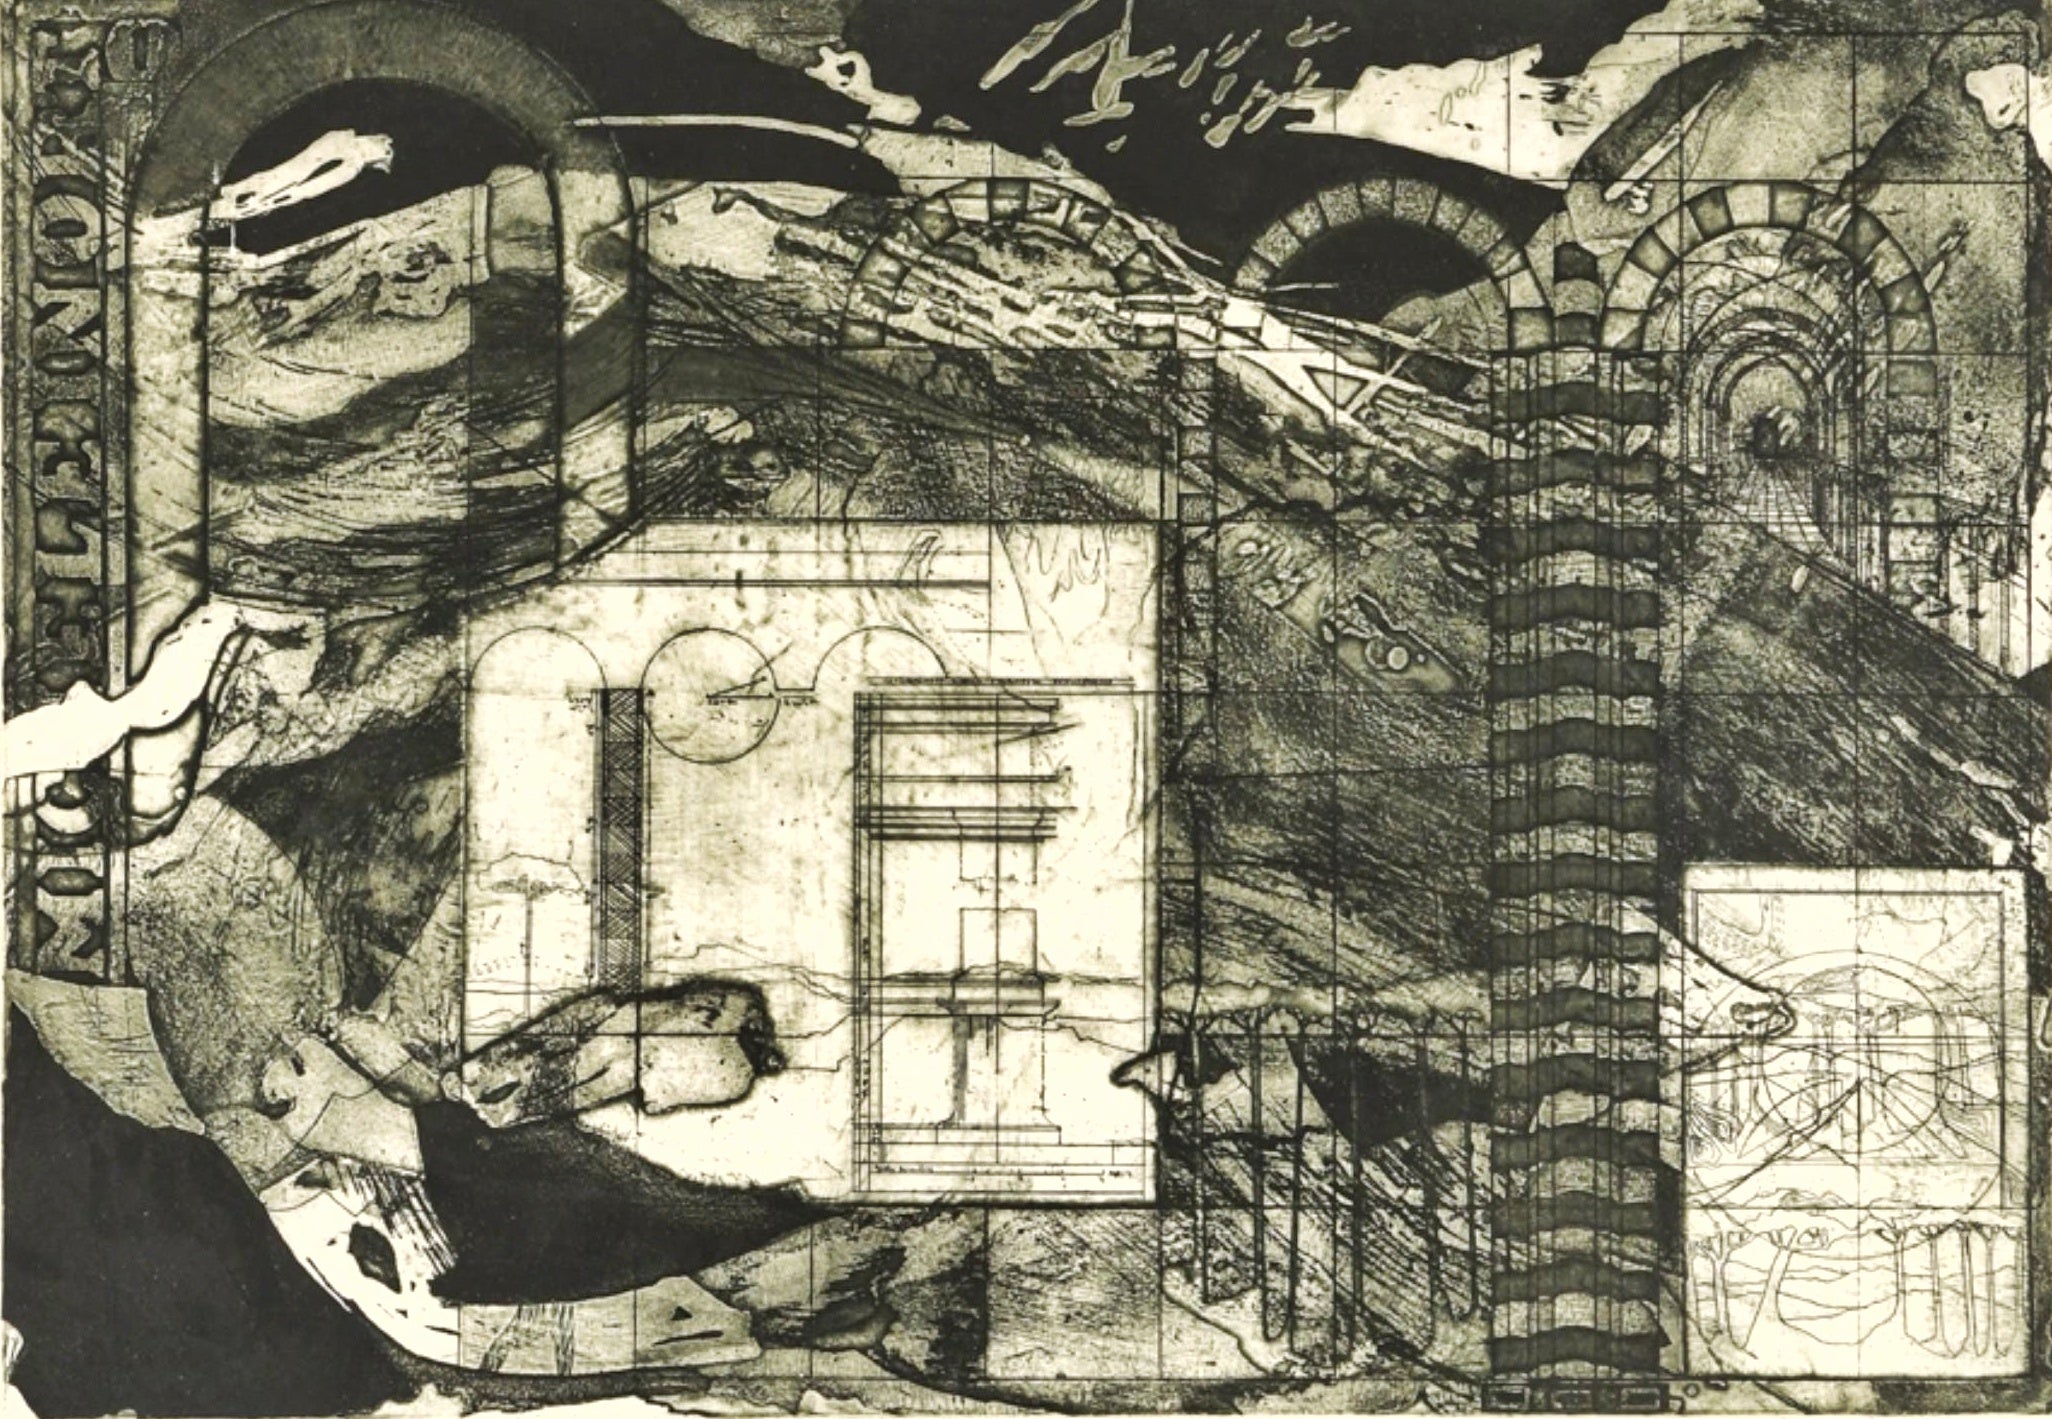 'MICHELE: FLOOD MEMORY AFFAIR' LITHOGRAPH BY JOANNE PASCHALL (1970s)